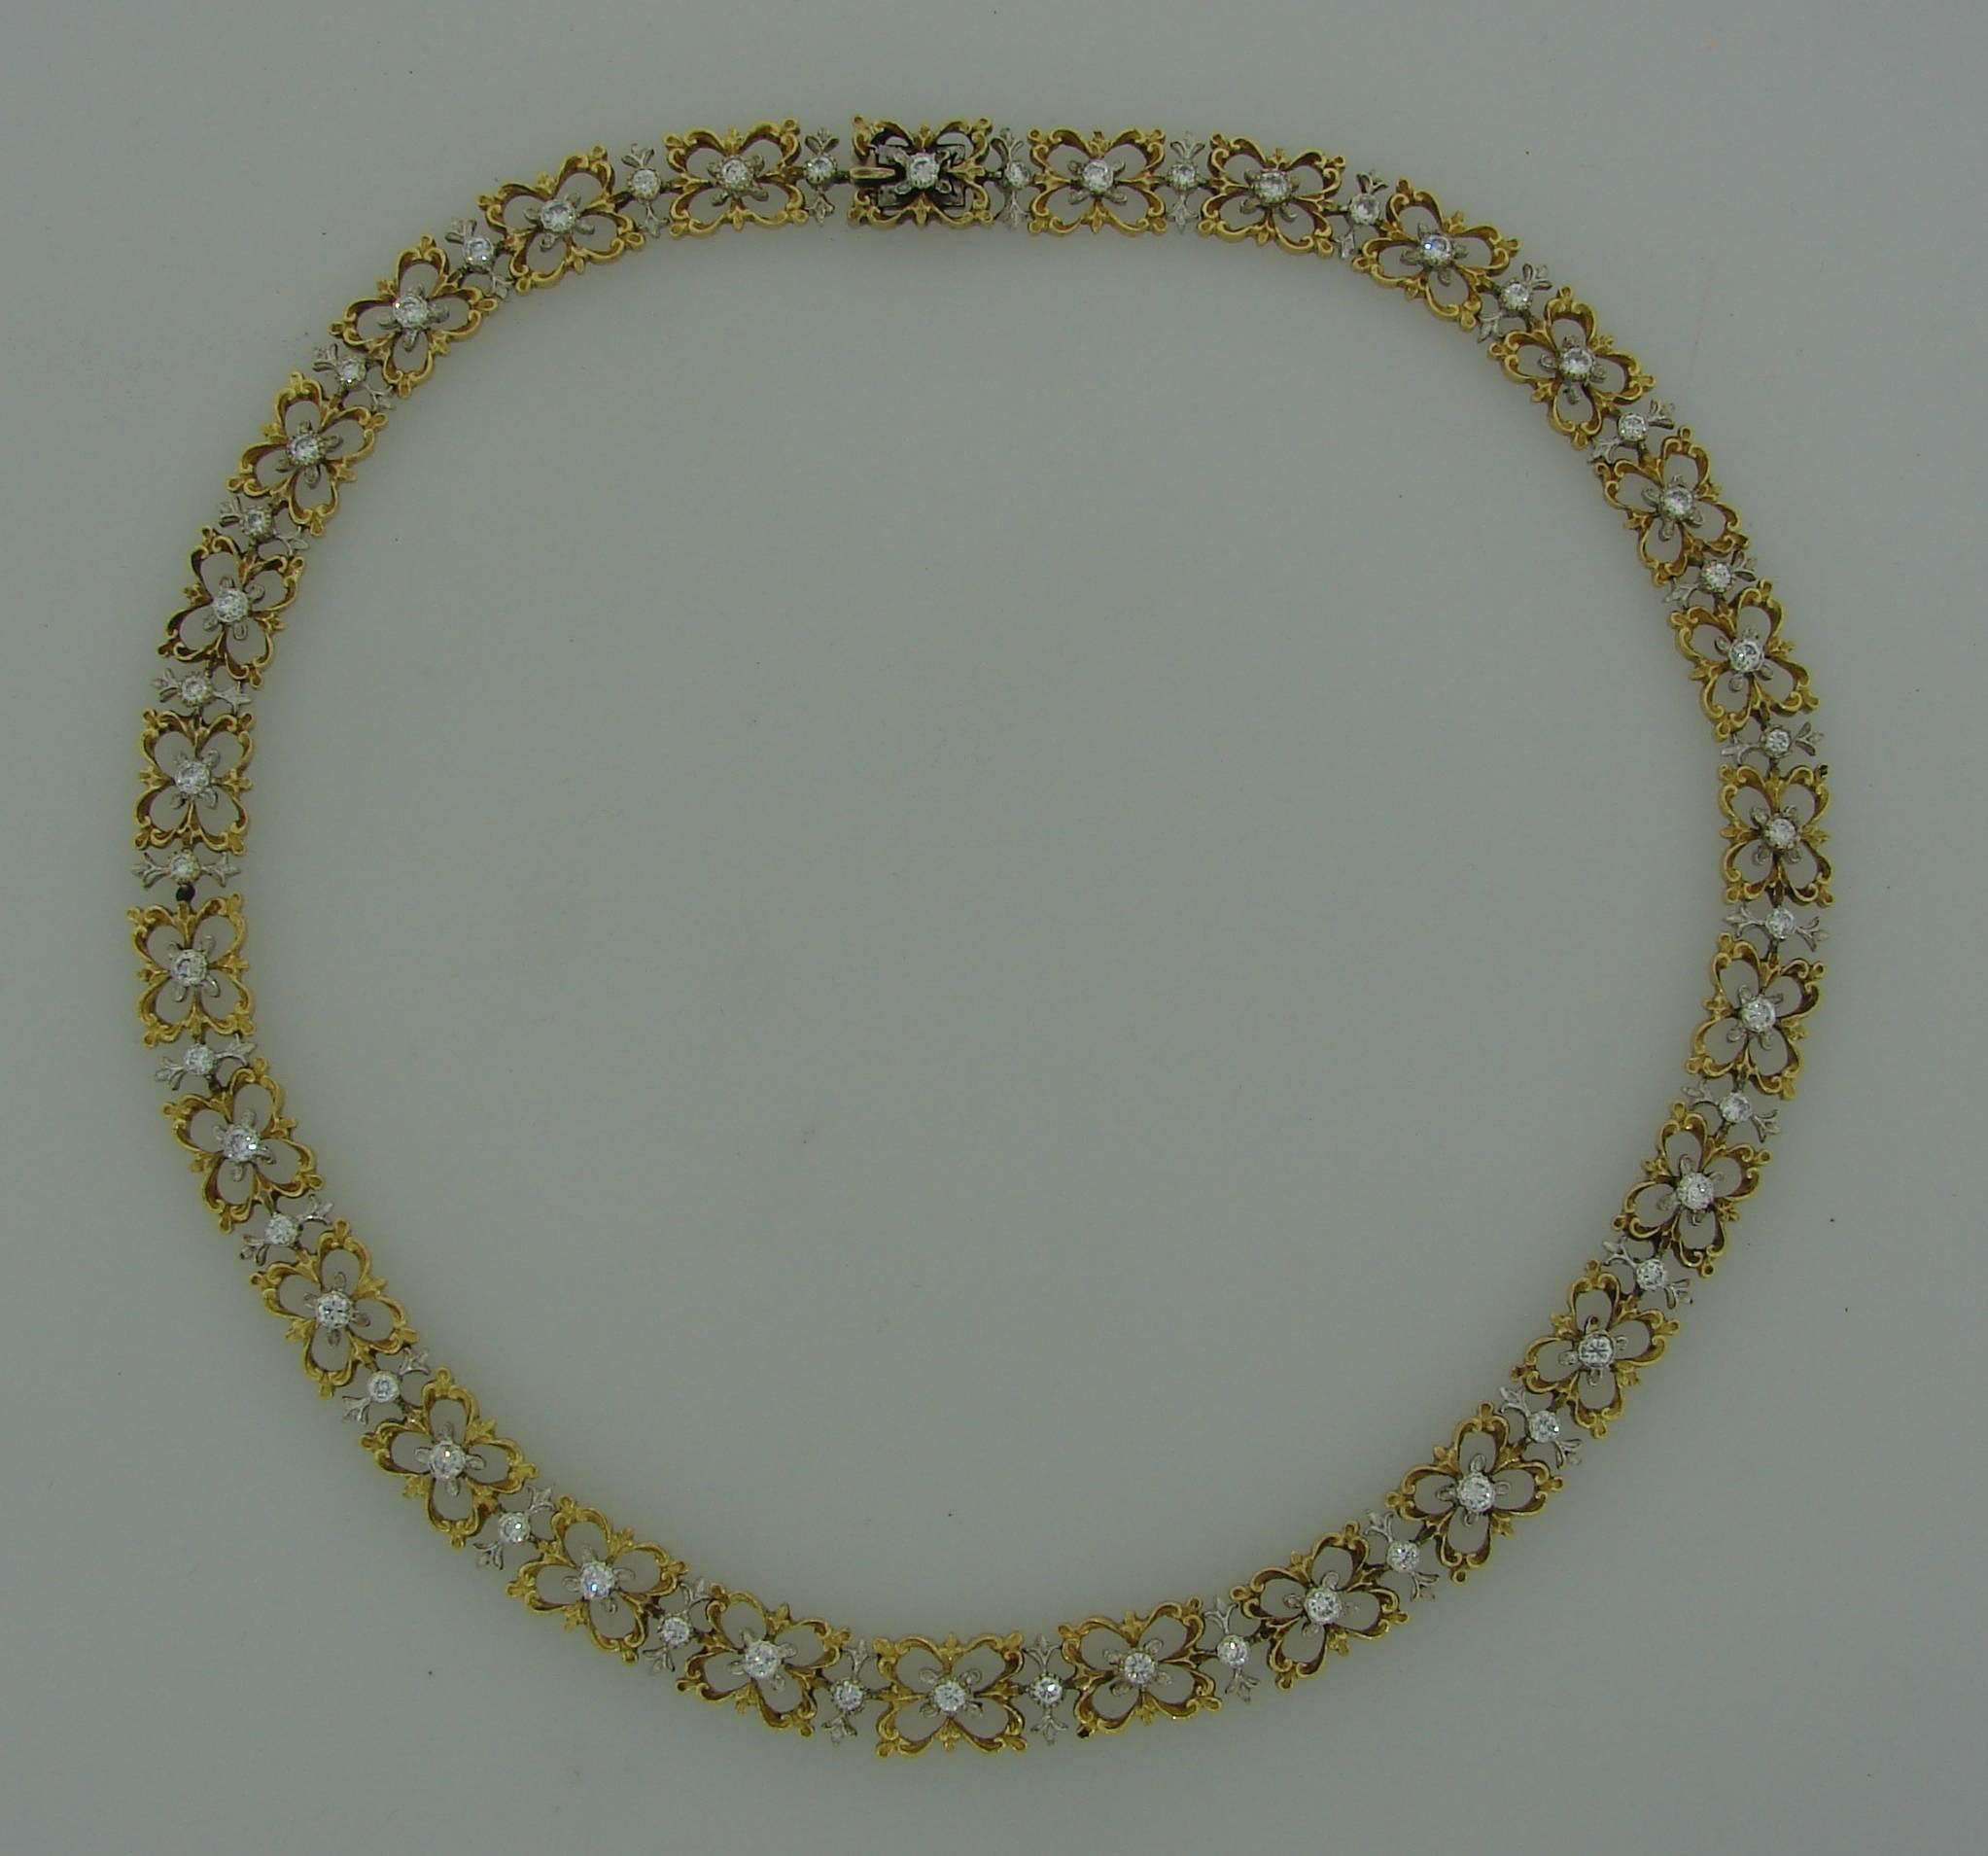 Feminine and delicate necklace created by Buccellati in Italy in the 1990's. Favorite Buccellati floral design. The necklace is made of 18k yellow and white gold and set with round brilliant cut diamonds (diamond total weight is approximately 2.21